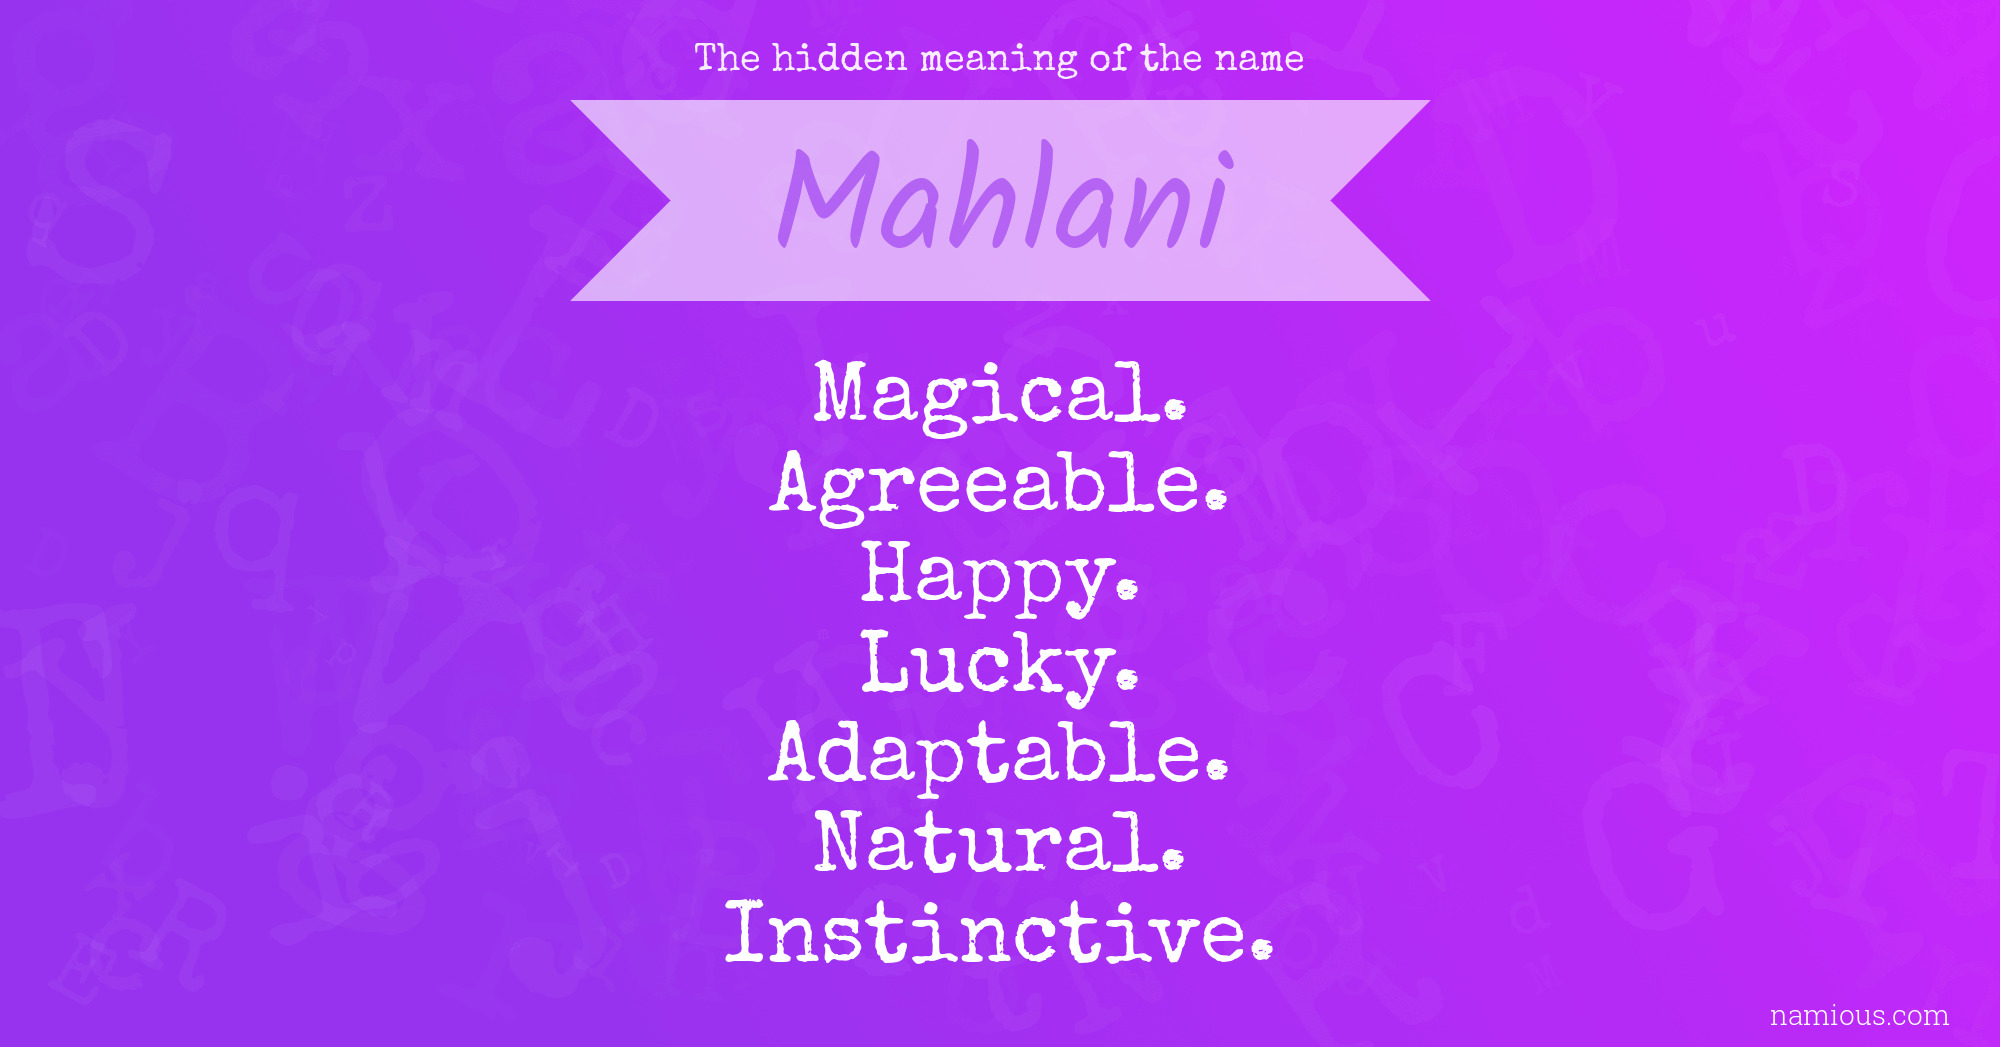 The hidden meaning of the name Mahlani